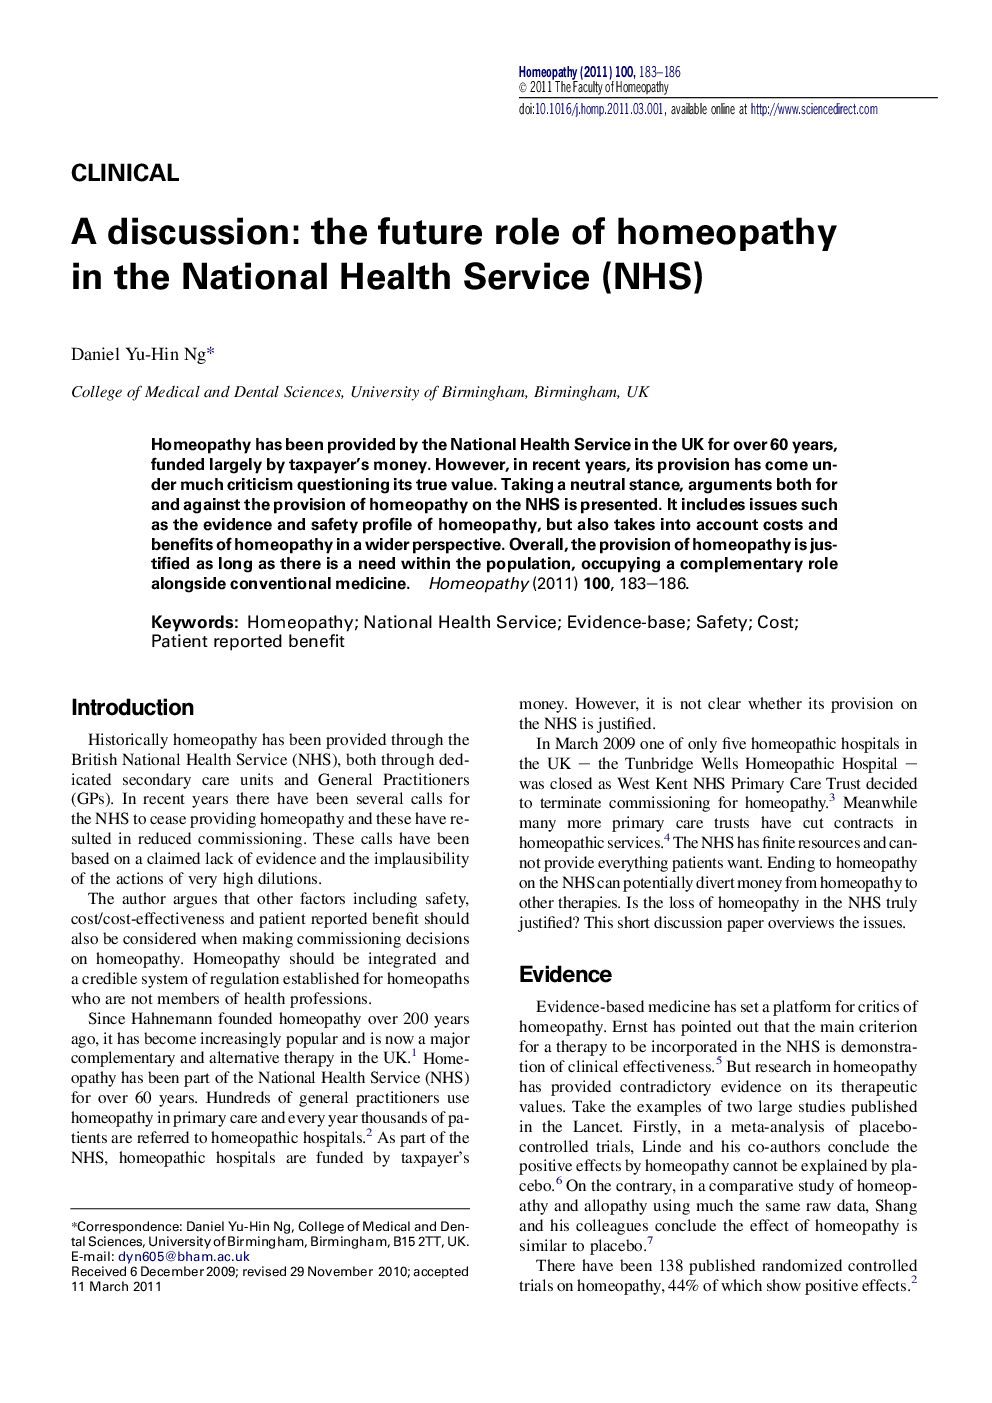 A discussion: the future role of homeopathy in the National Health Service (NHS)